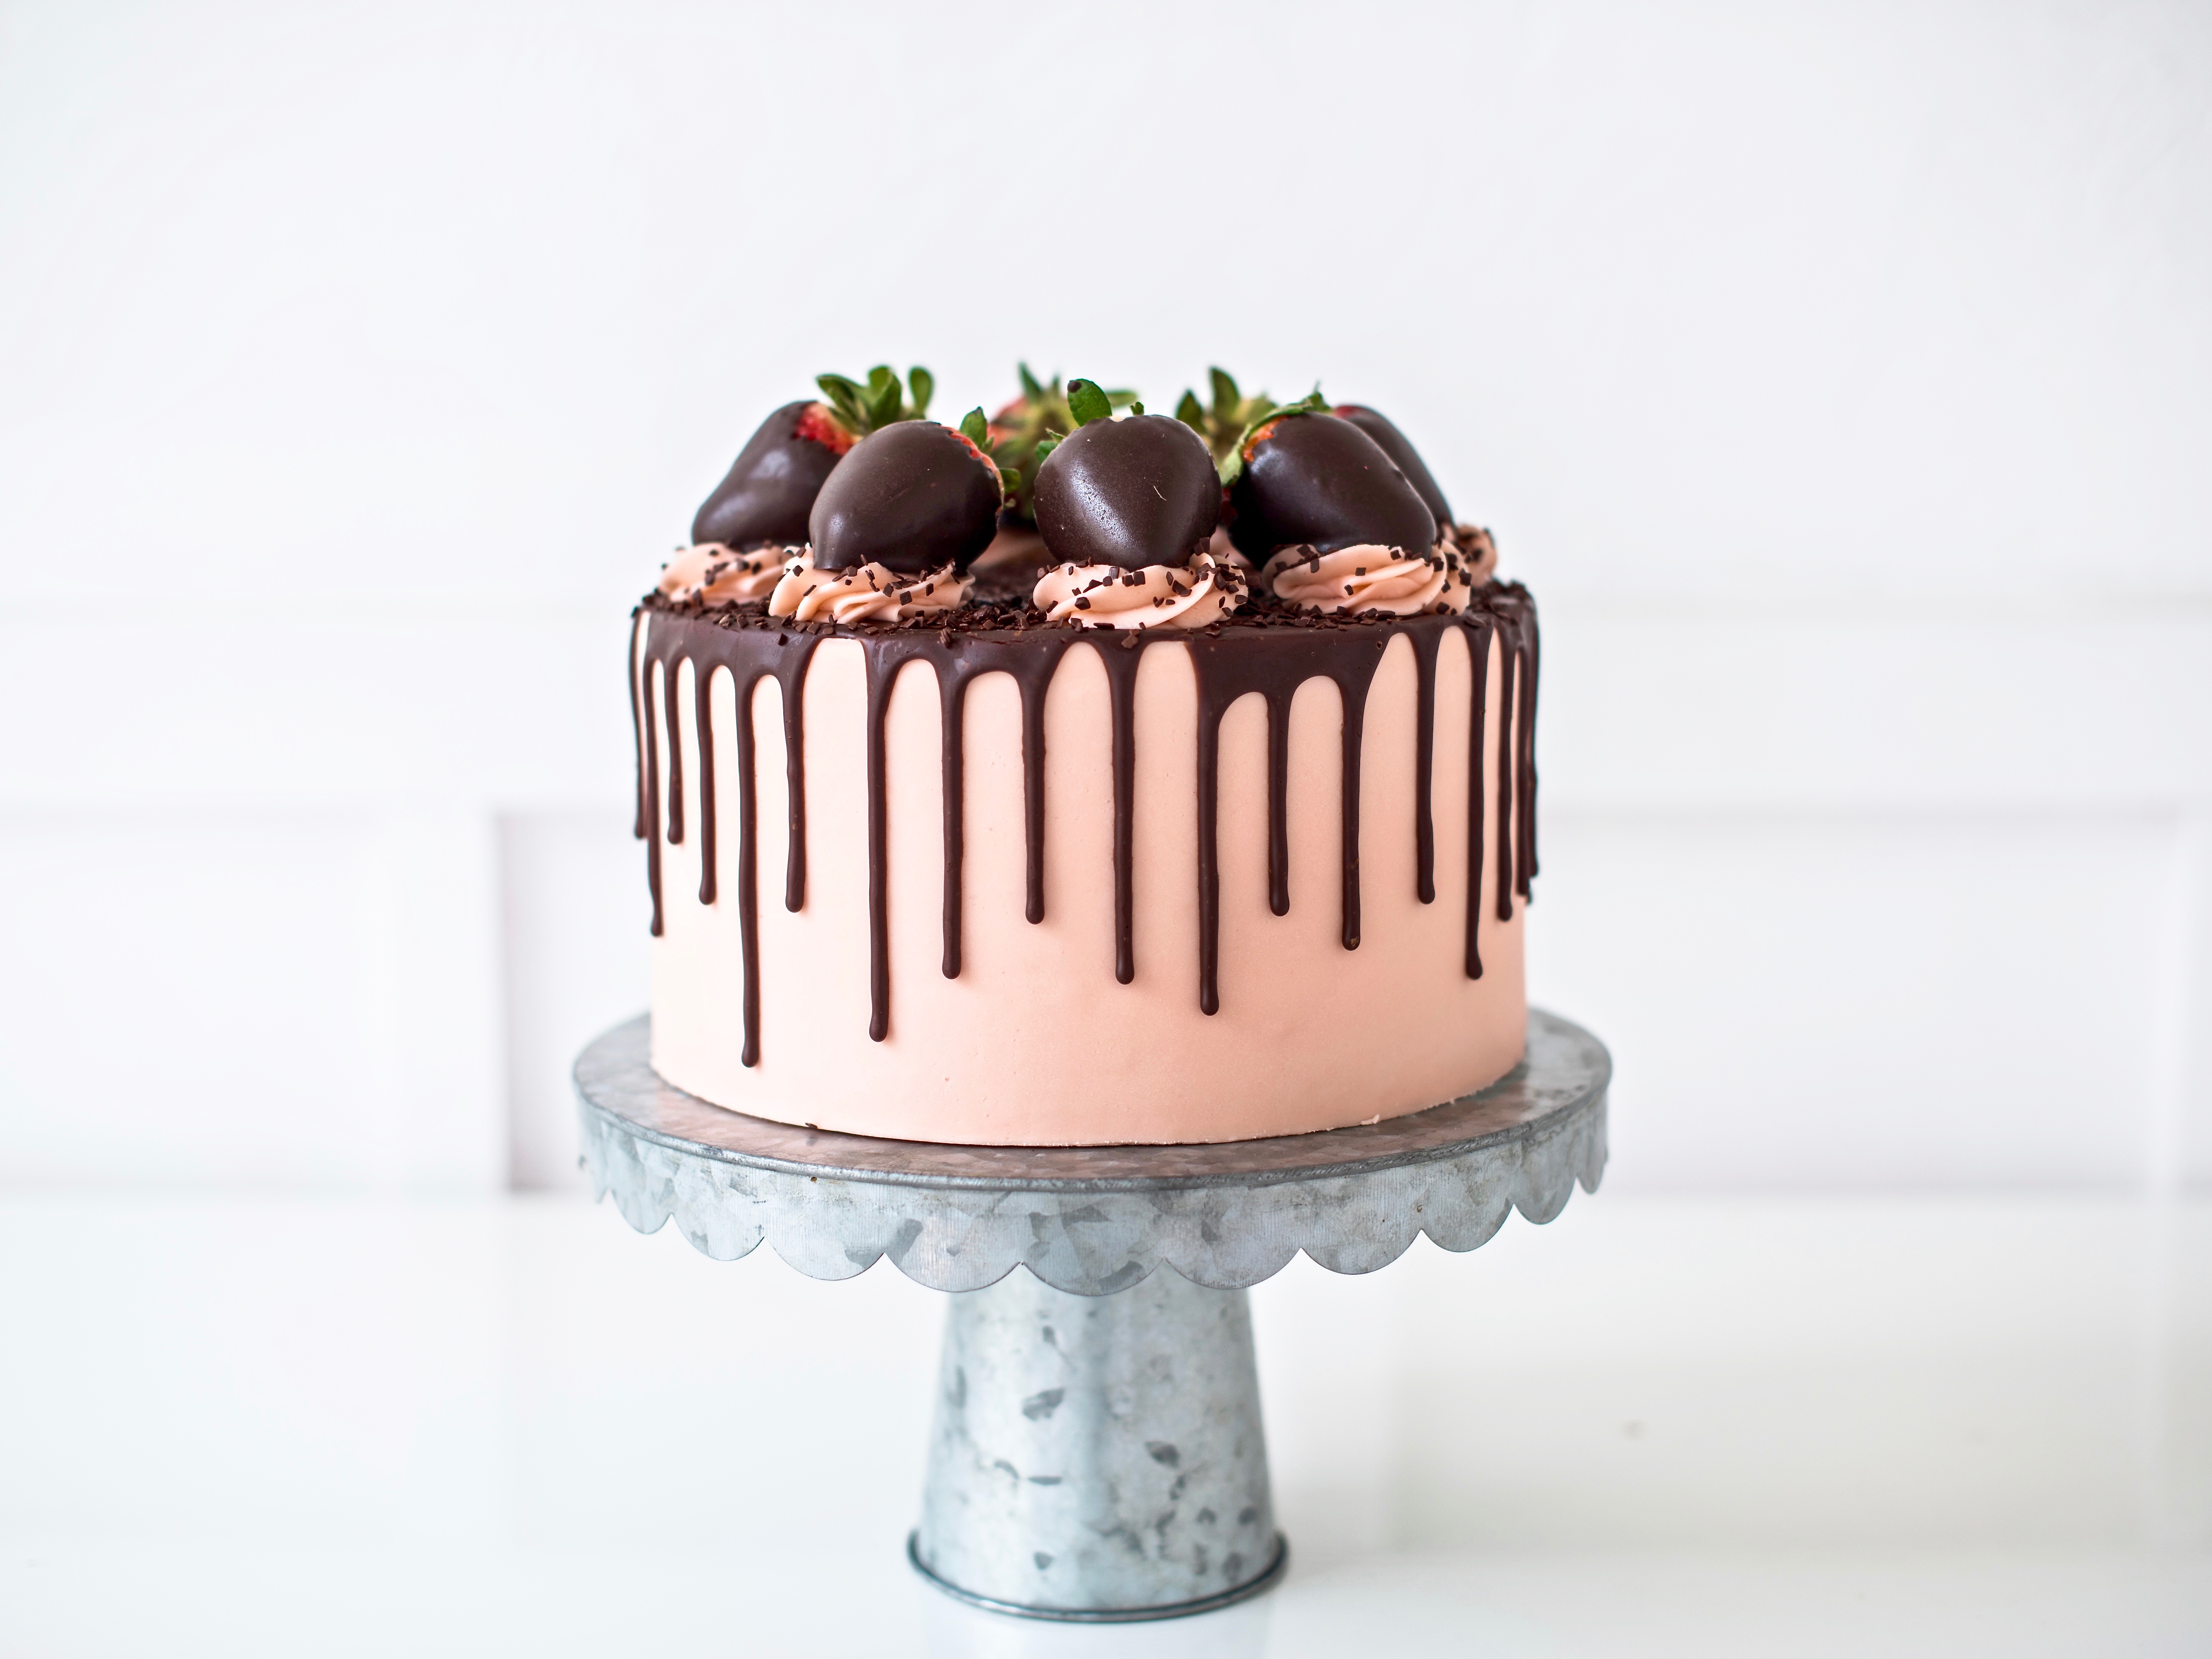 Fancy Chocolate Cake Photograph by Pattie Calfy - Pixels